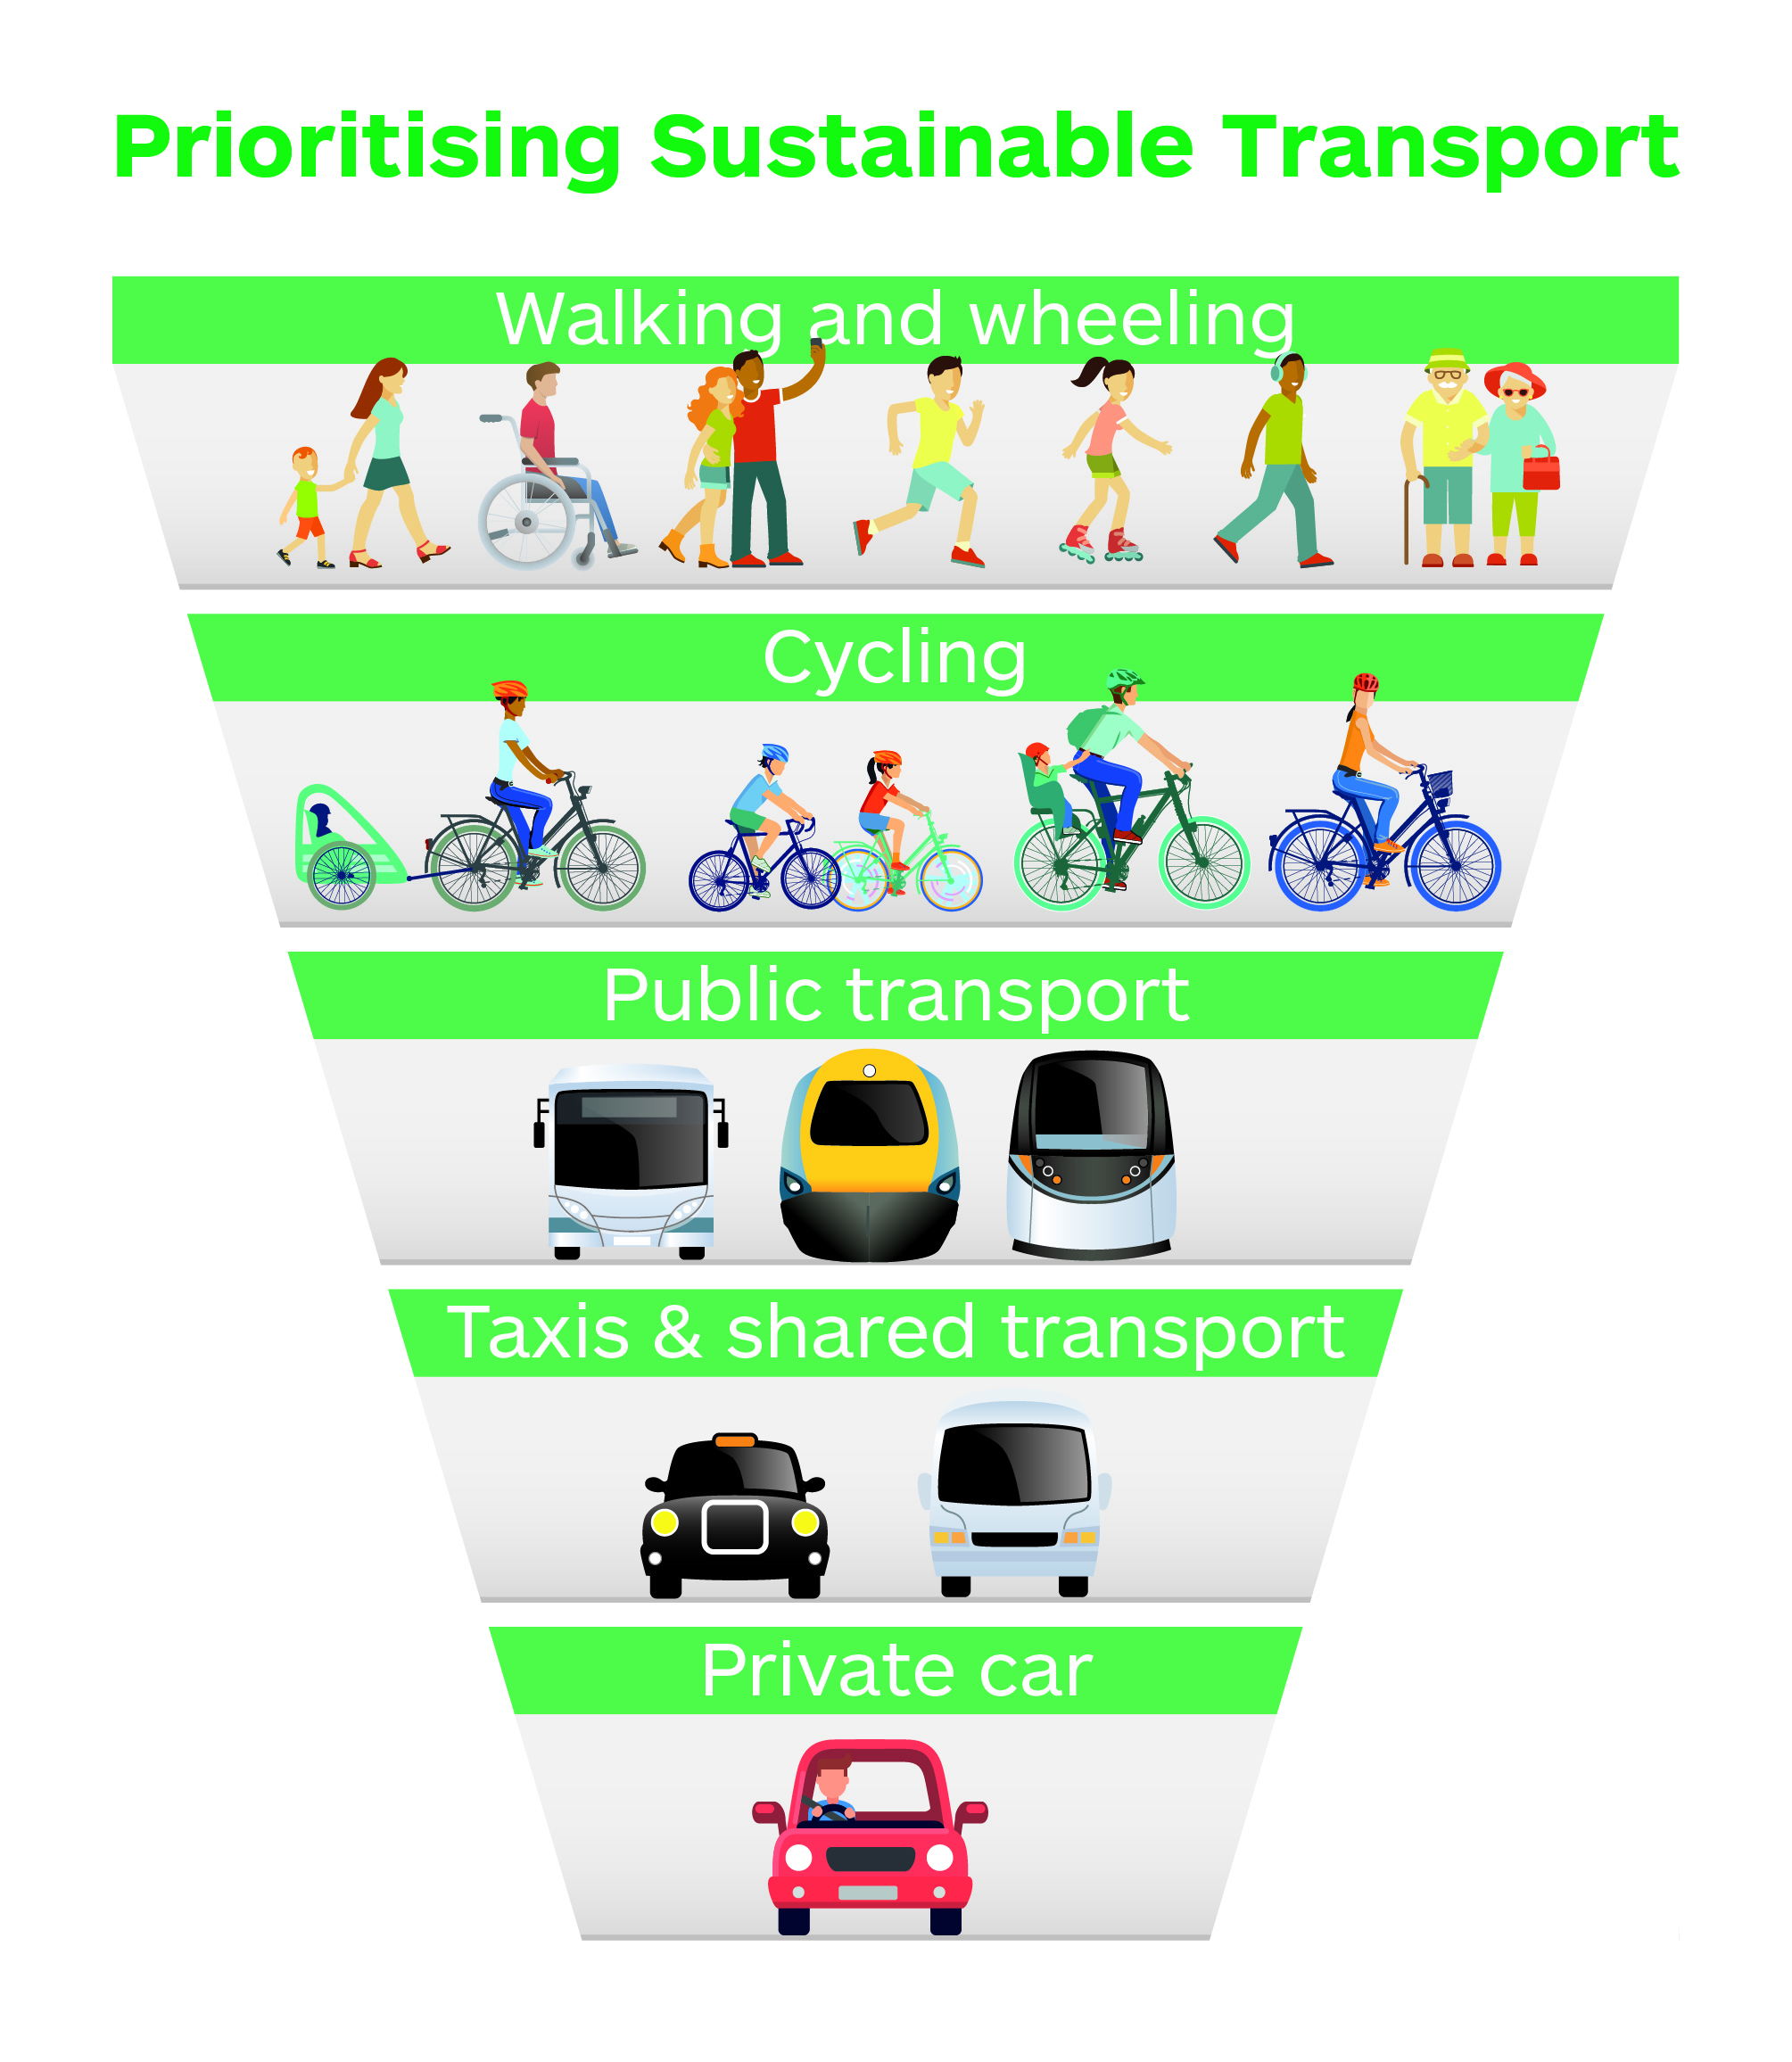 Funnel diagram showing the sustainable travel hierarchy, namely that walking and wheeling is the highest priority, then cycling, then public transport, then taxis and shared transport, and finally private cars